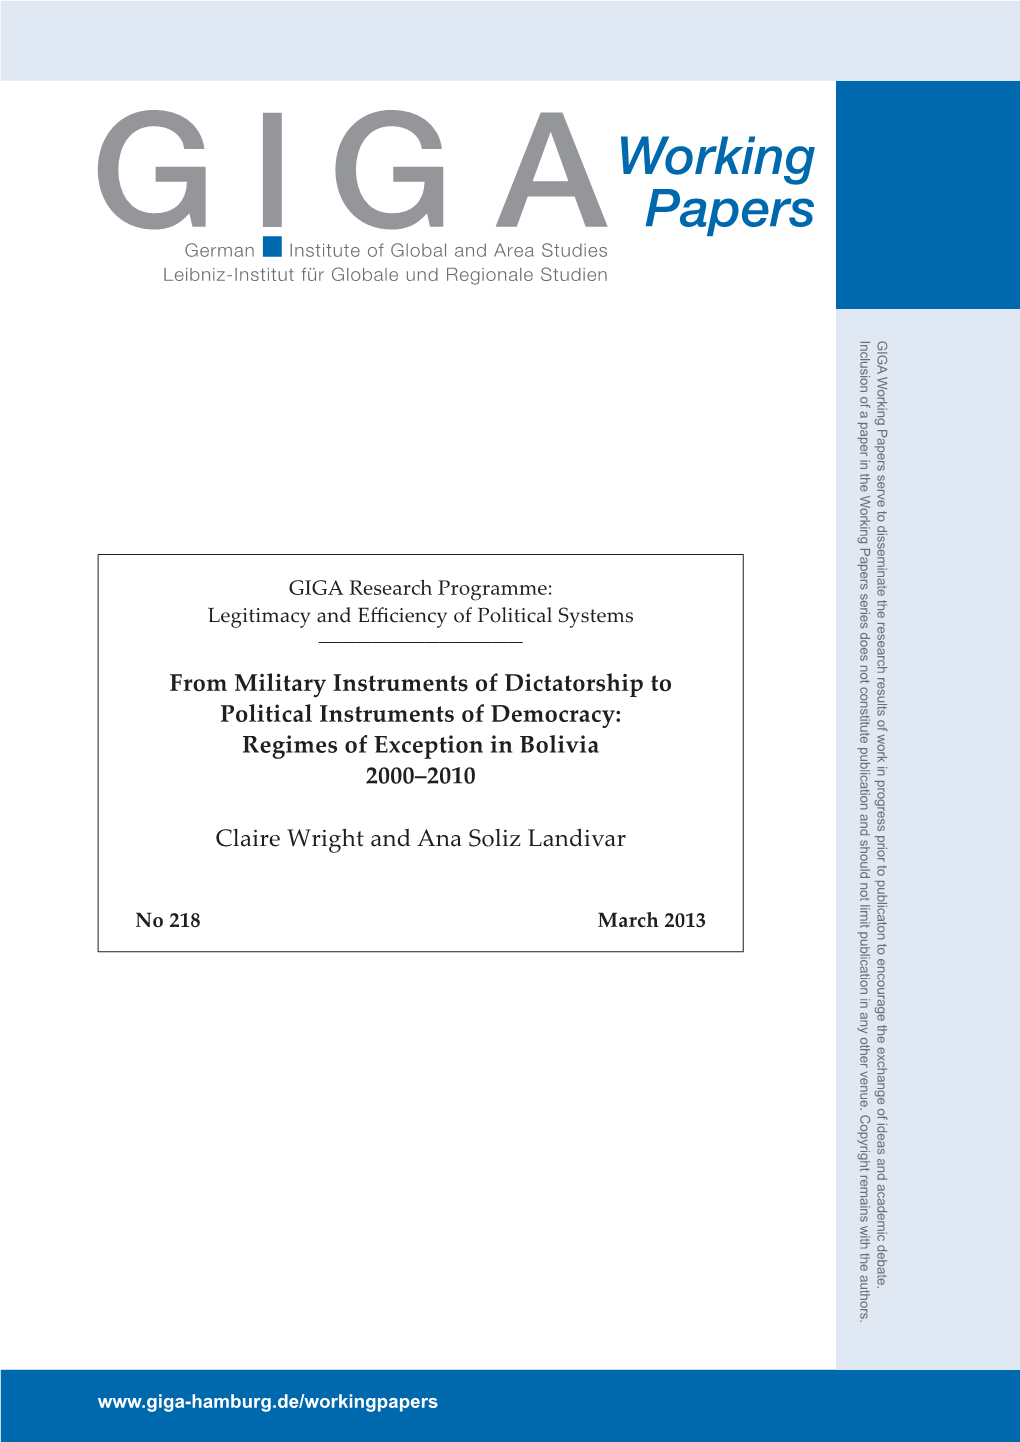 From Military Instruments of Dictatorship to Political Instruments of Democracy: Regimes of Exception in Bolivia 2000–2010